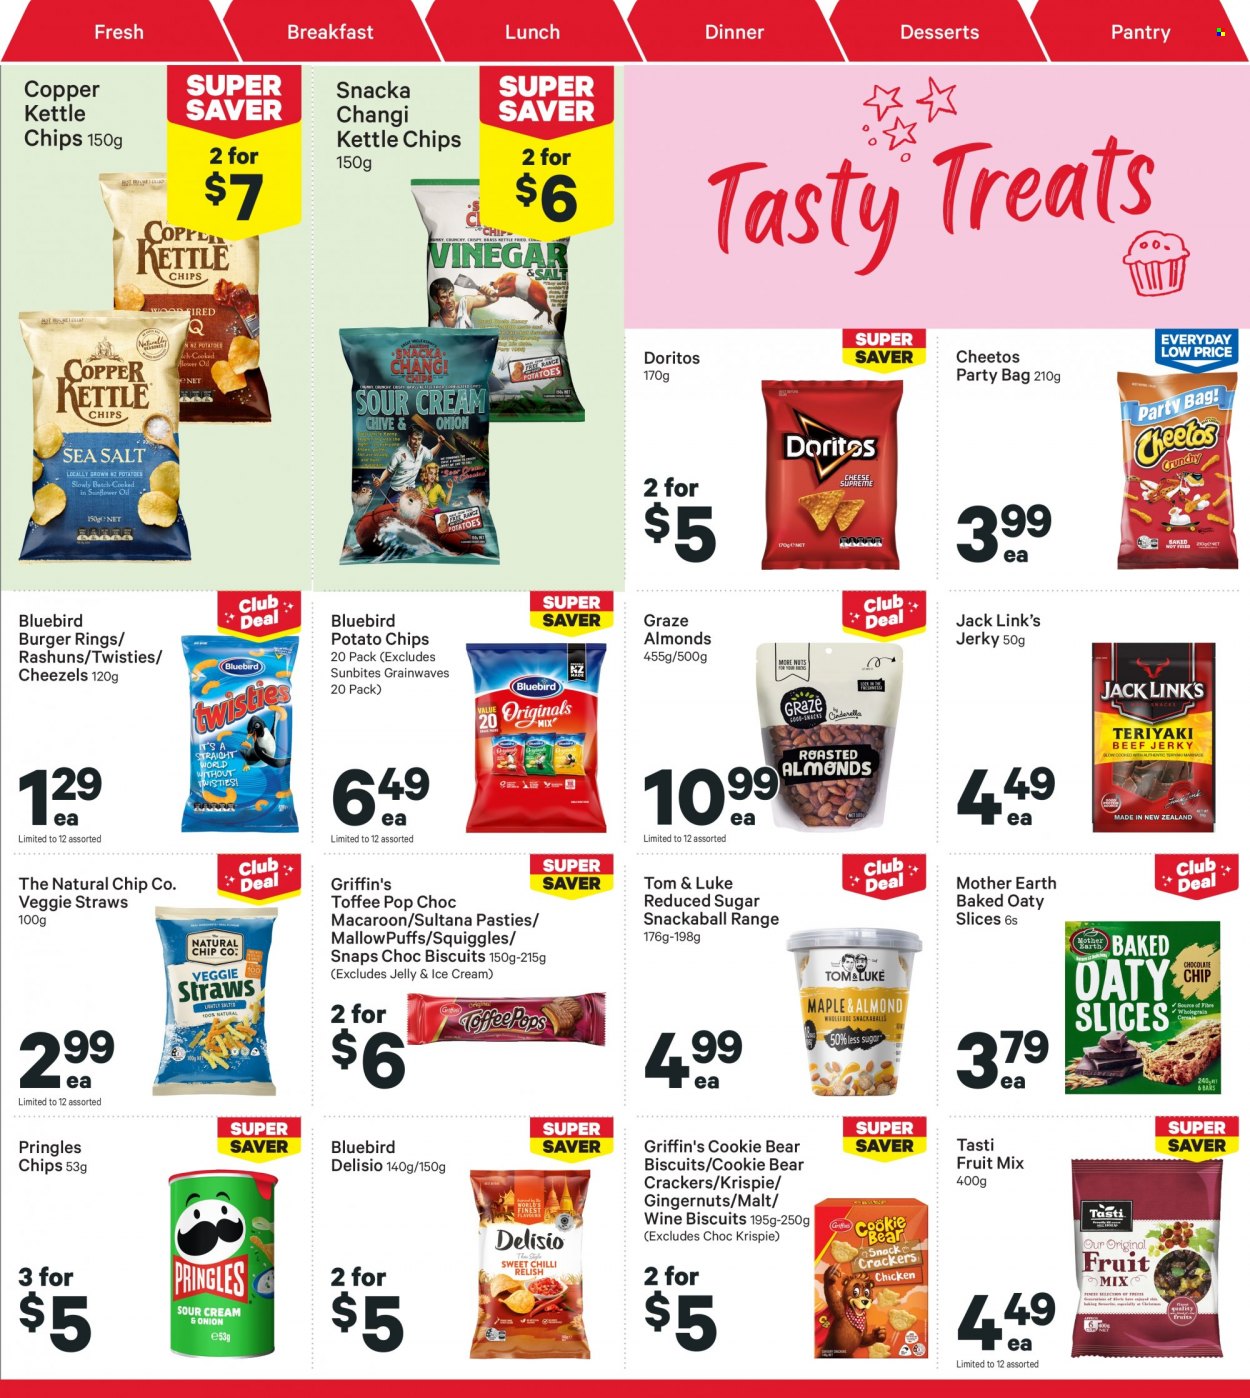 thumbnail - New World mailer - 28.11.2022 - 04.12.2022 - Sales products - hamburger, jerky, ice cream, fruit mix, toffee, jelly, crackers, biscuit, MallowPuffs, Griffin's, Mother Earth, Doritos, potato chips, Pringles, Cheetos, chips, Bluebird, Delisio, Sunbites, Copper Kettle, veggie straws, Jack Link's, almonds, Graze, wine, bag. Page 23.